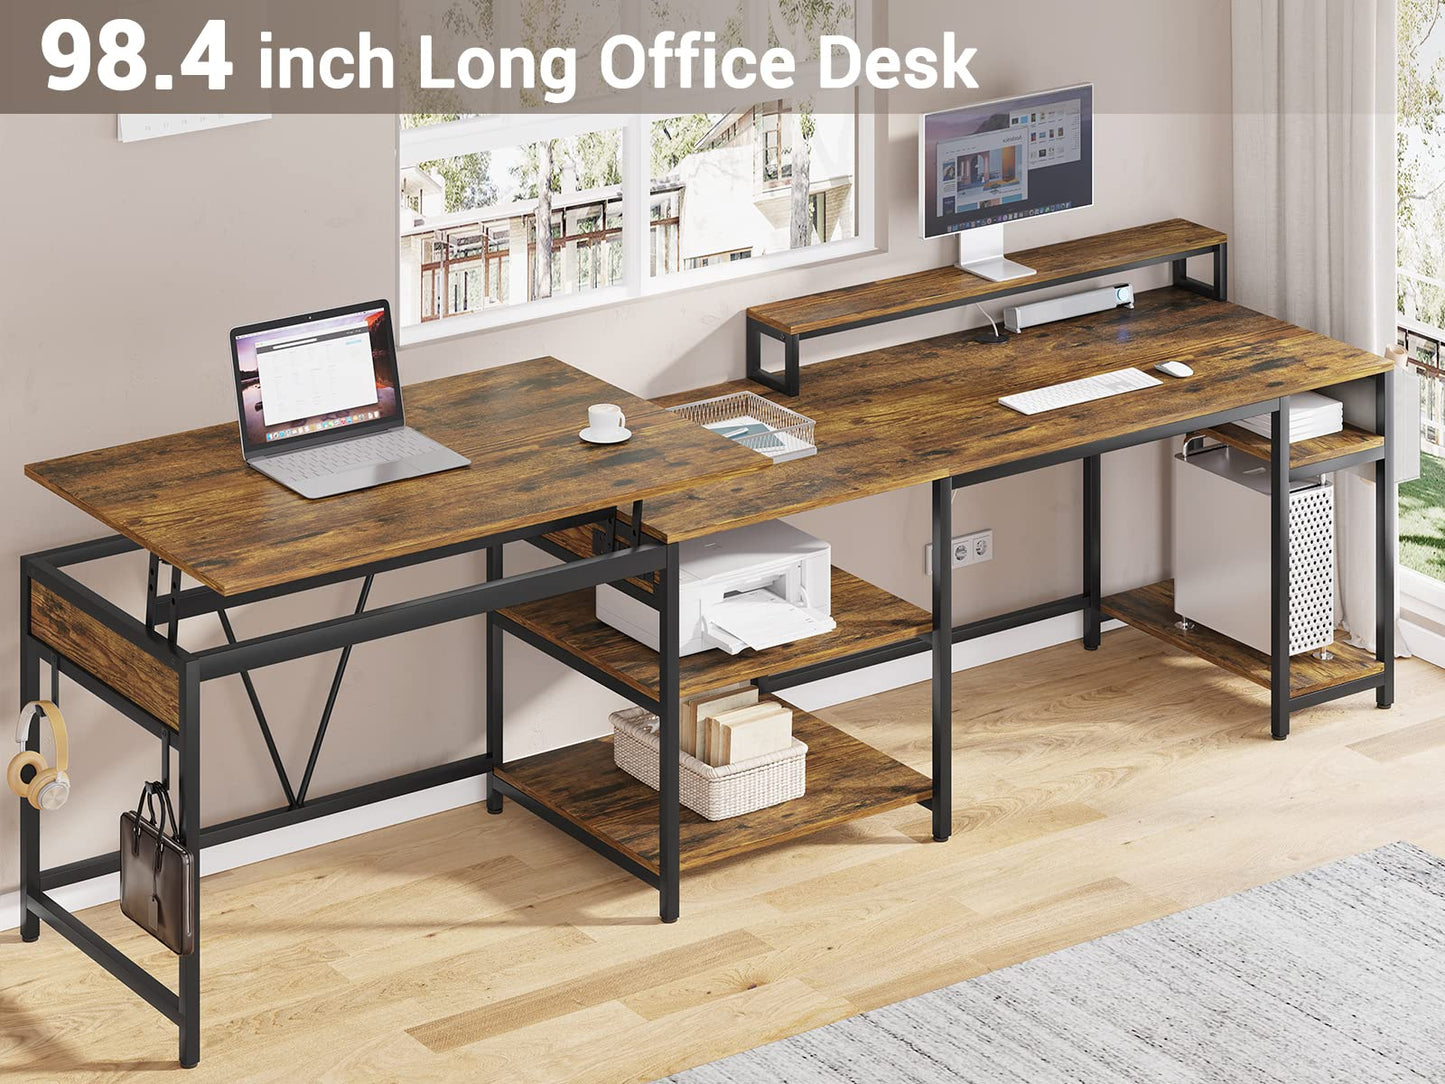 SEDETA L Shaped Desk with Lift Top, Convertible Home Office Desk, L Shaped Standing Desk with Storage Shelves, Monitor Stand, and Headphone Hook for